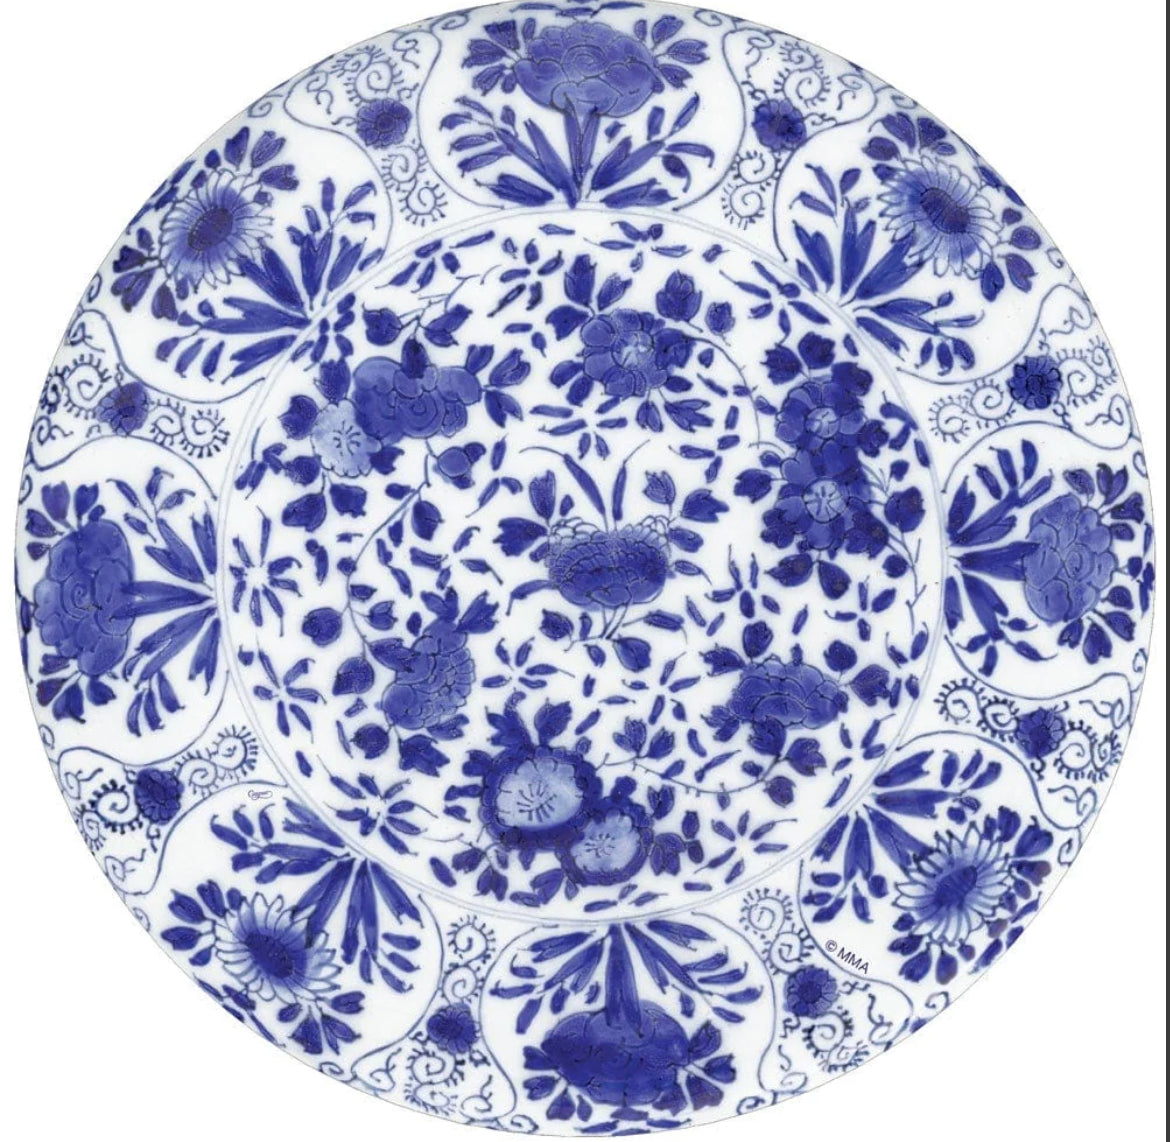 Delft Die-Cut Placemat in Blue - 4 Per Package